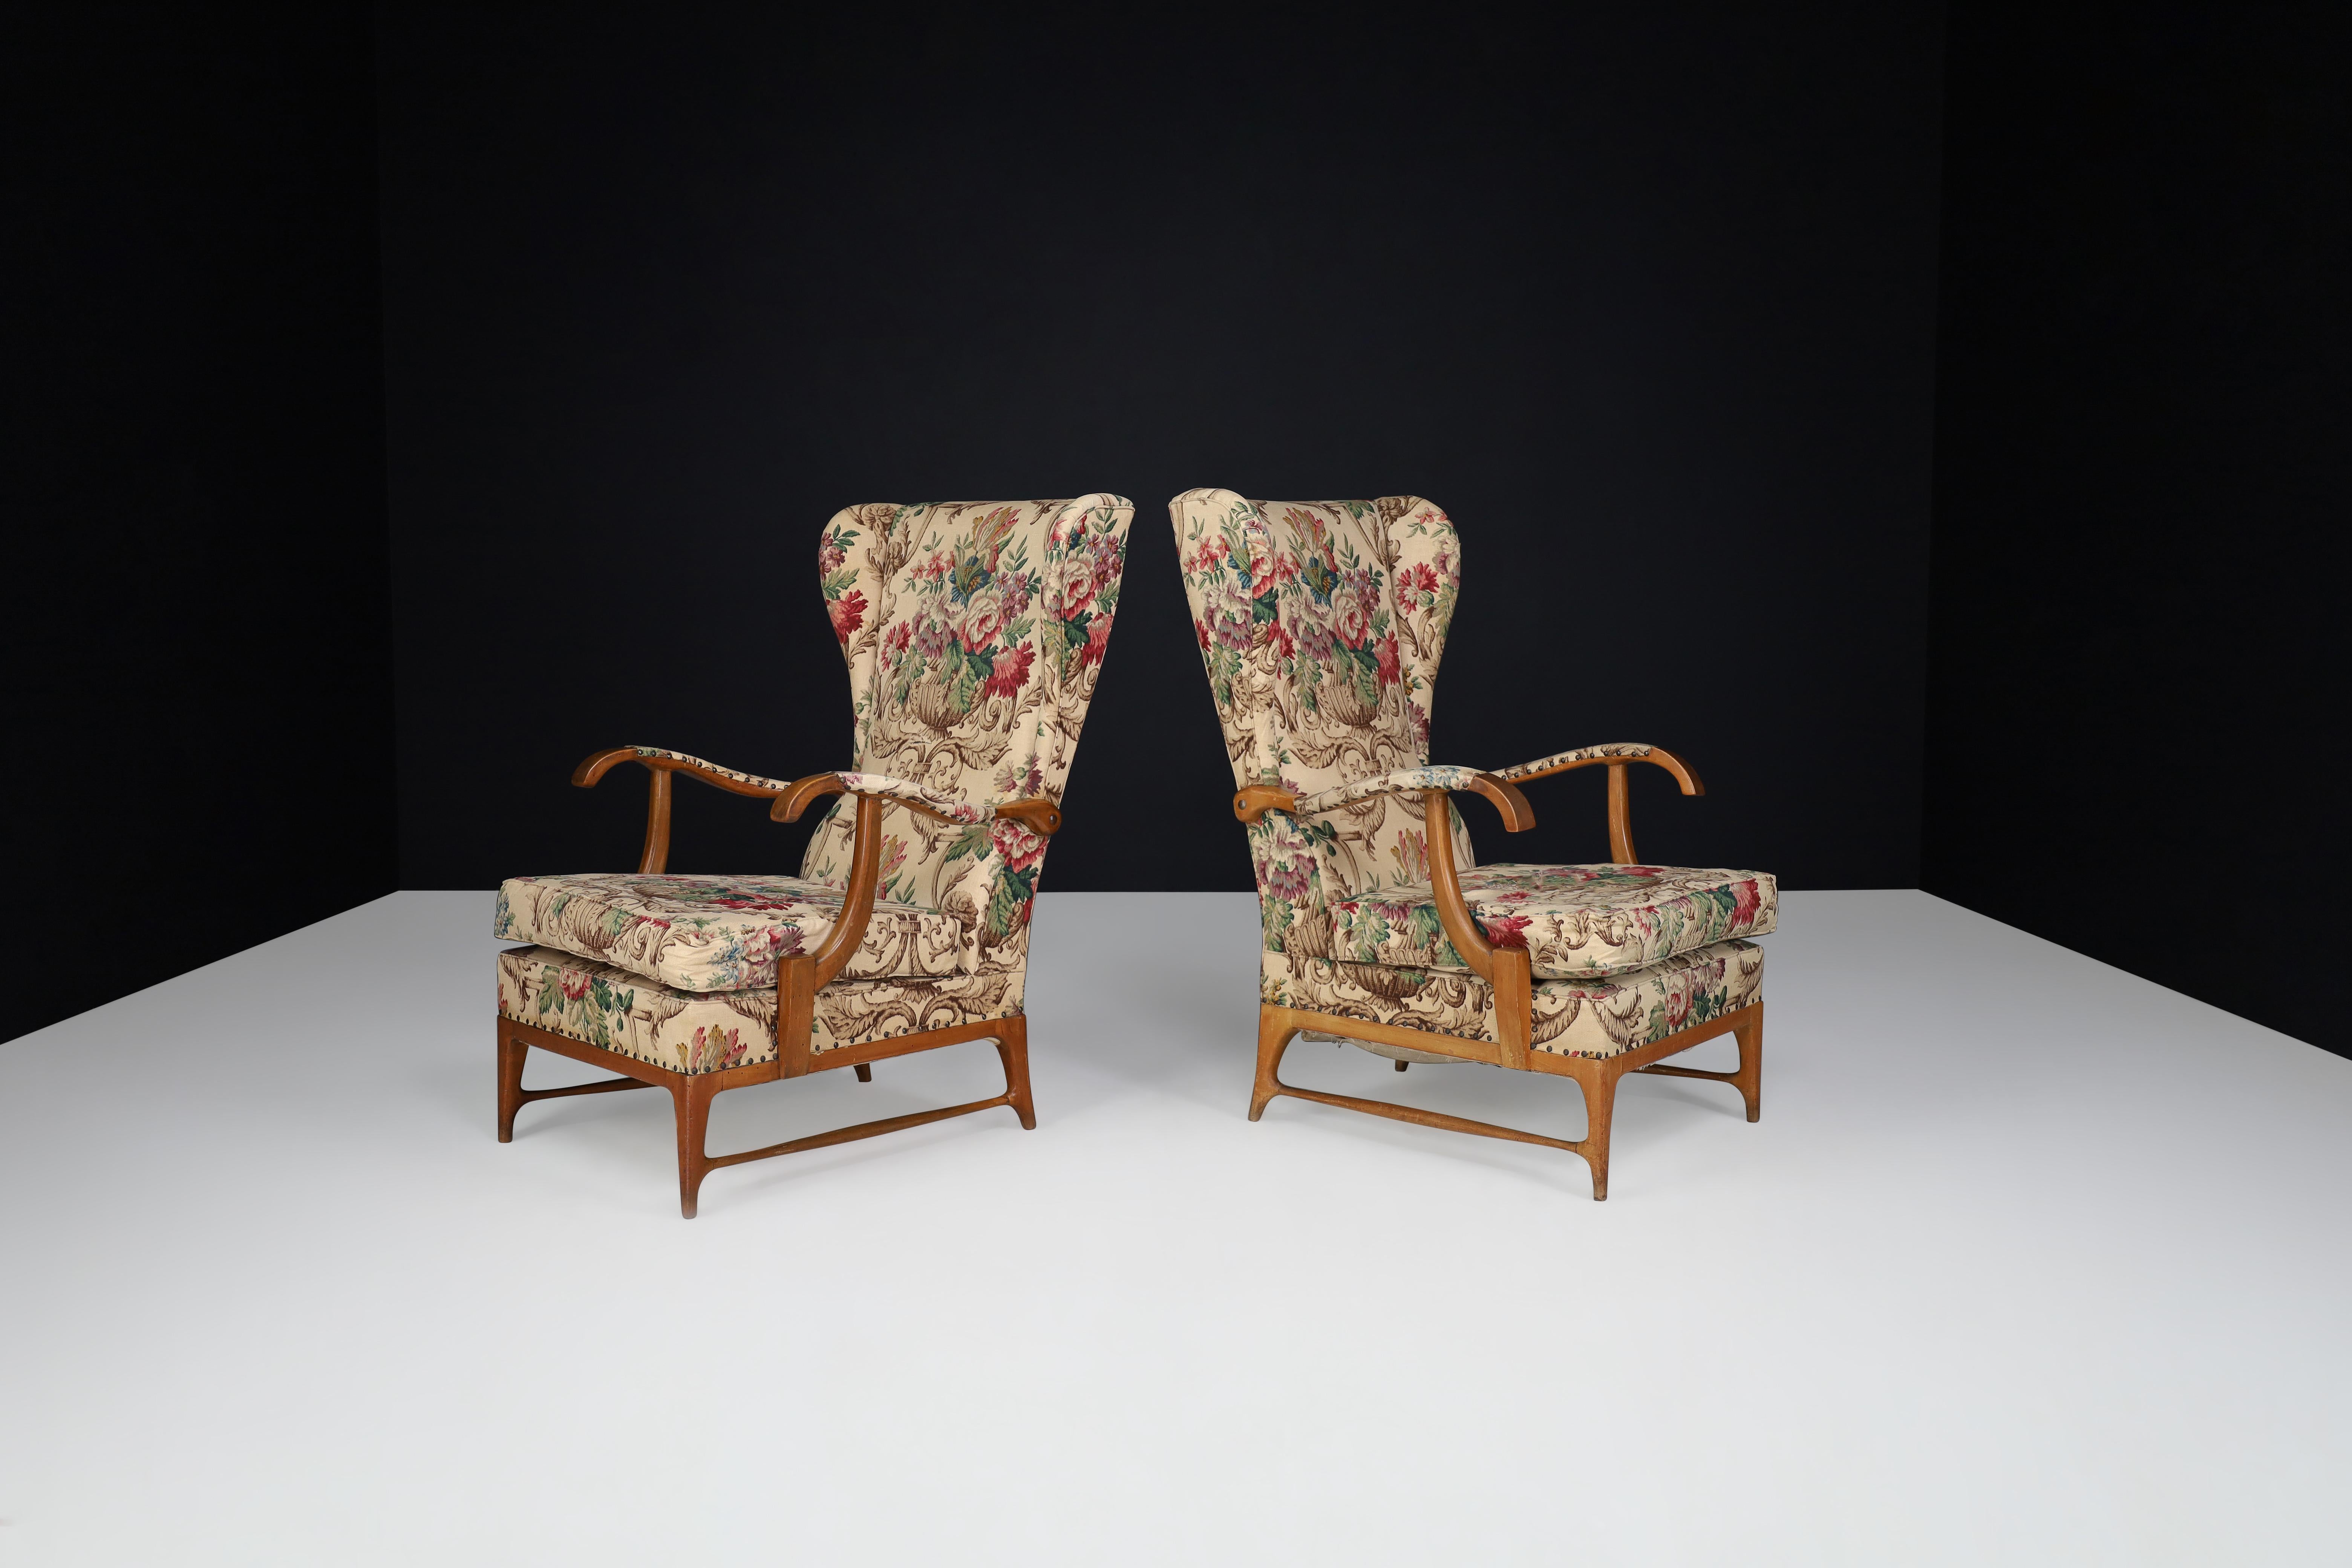 Fabric Paolo Buffa High-Back Armchairs with Floral Upholstery, Italy, 1940s